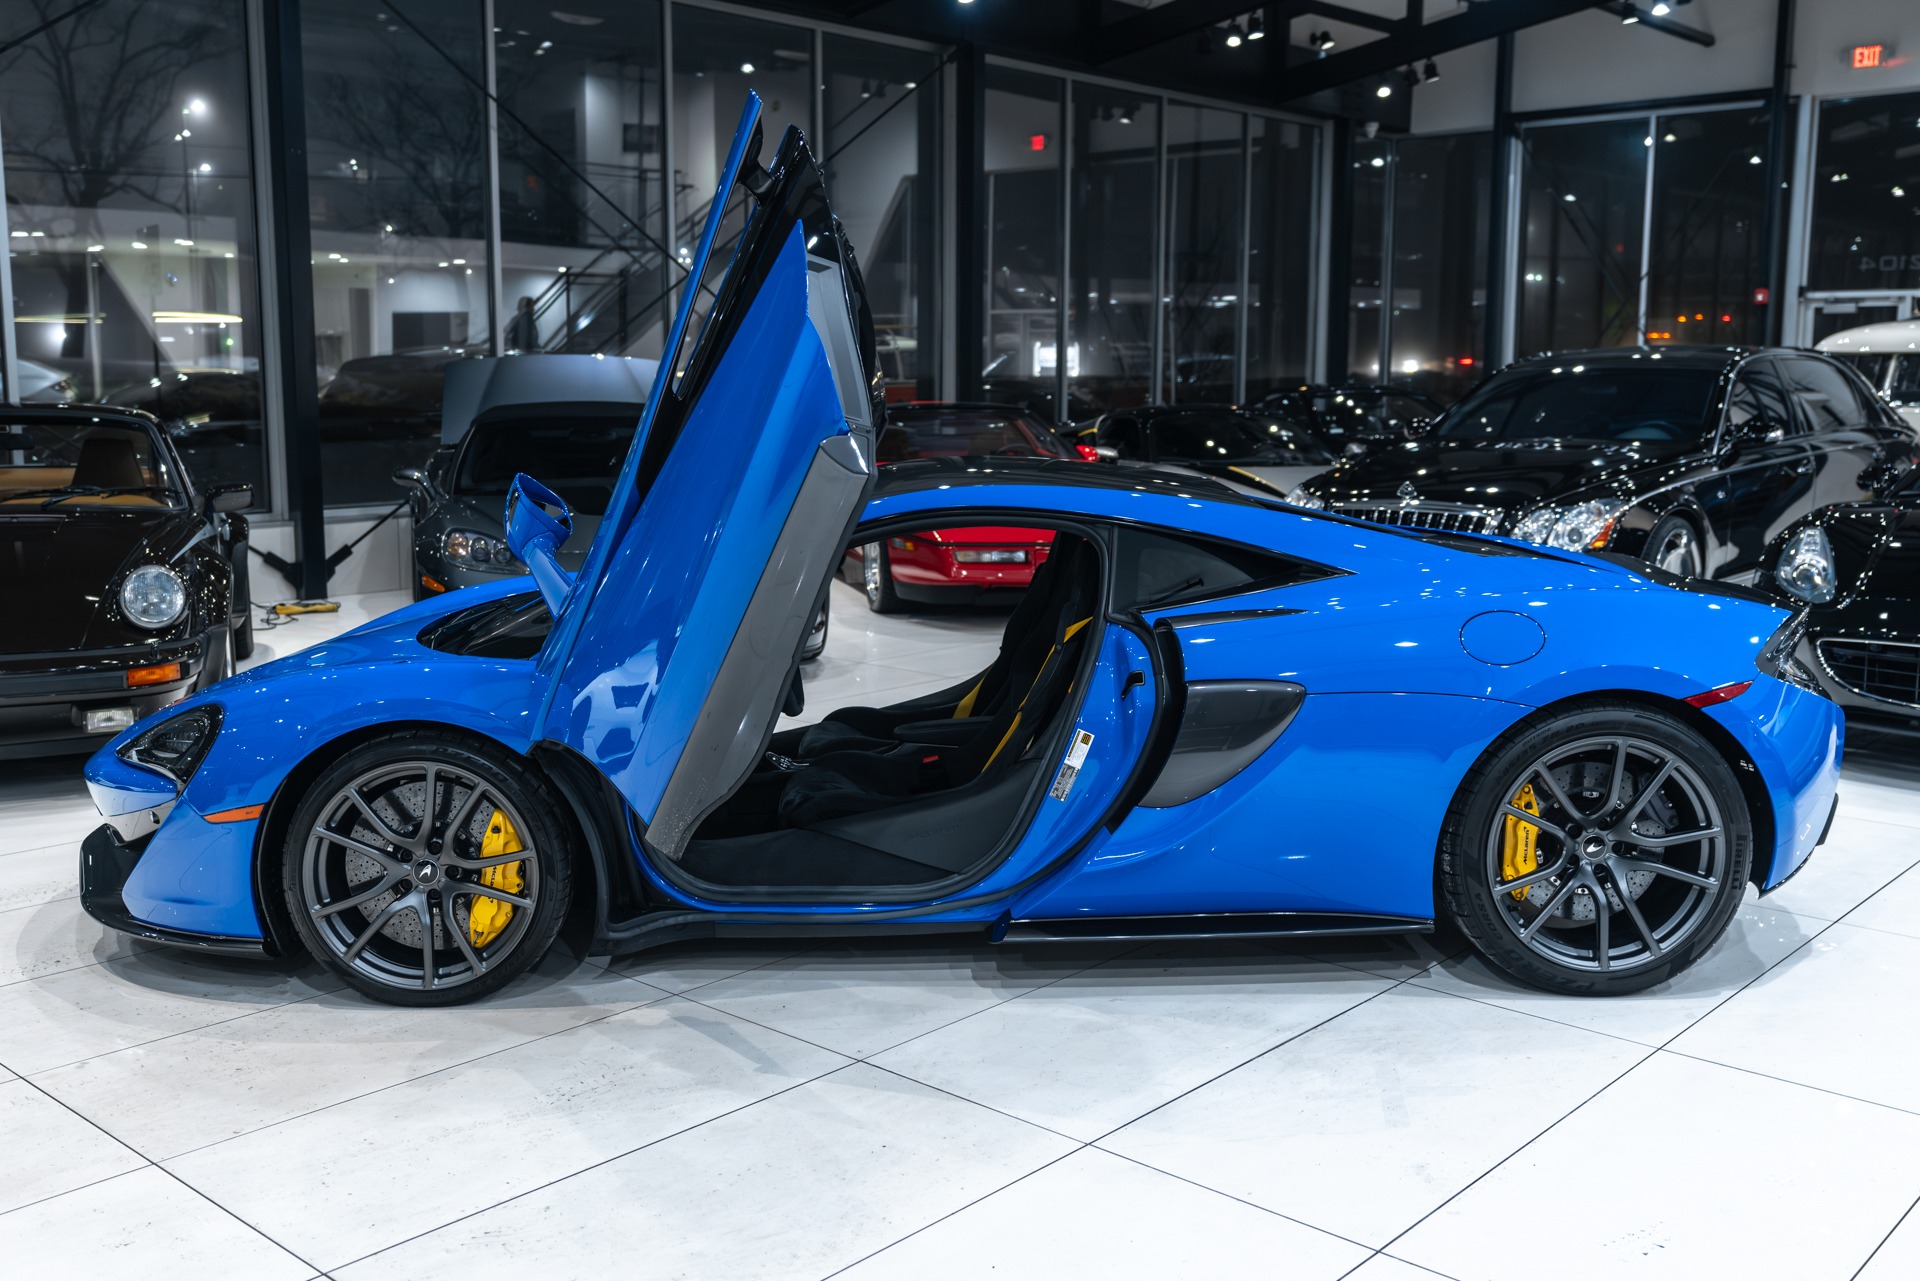 Used-2019-McLaren-570S-Coupe-ONLY-4k-Miles-Track-Pack-Front-Lift-RARE-MSO-Paris-Blue-LOADED